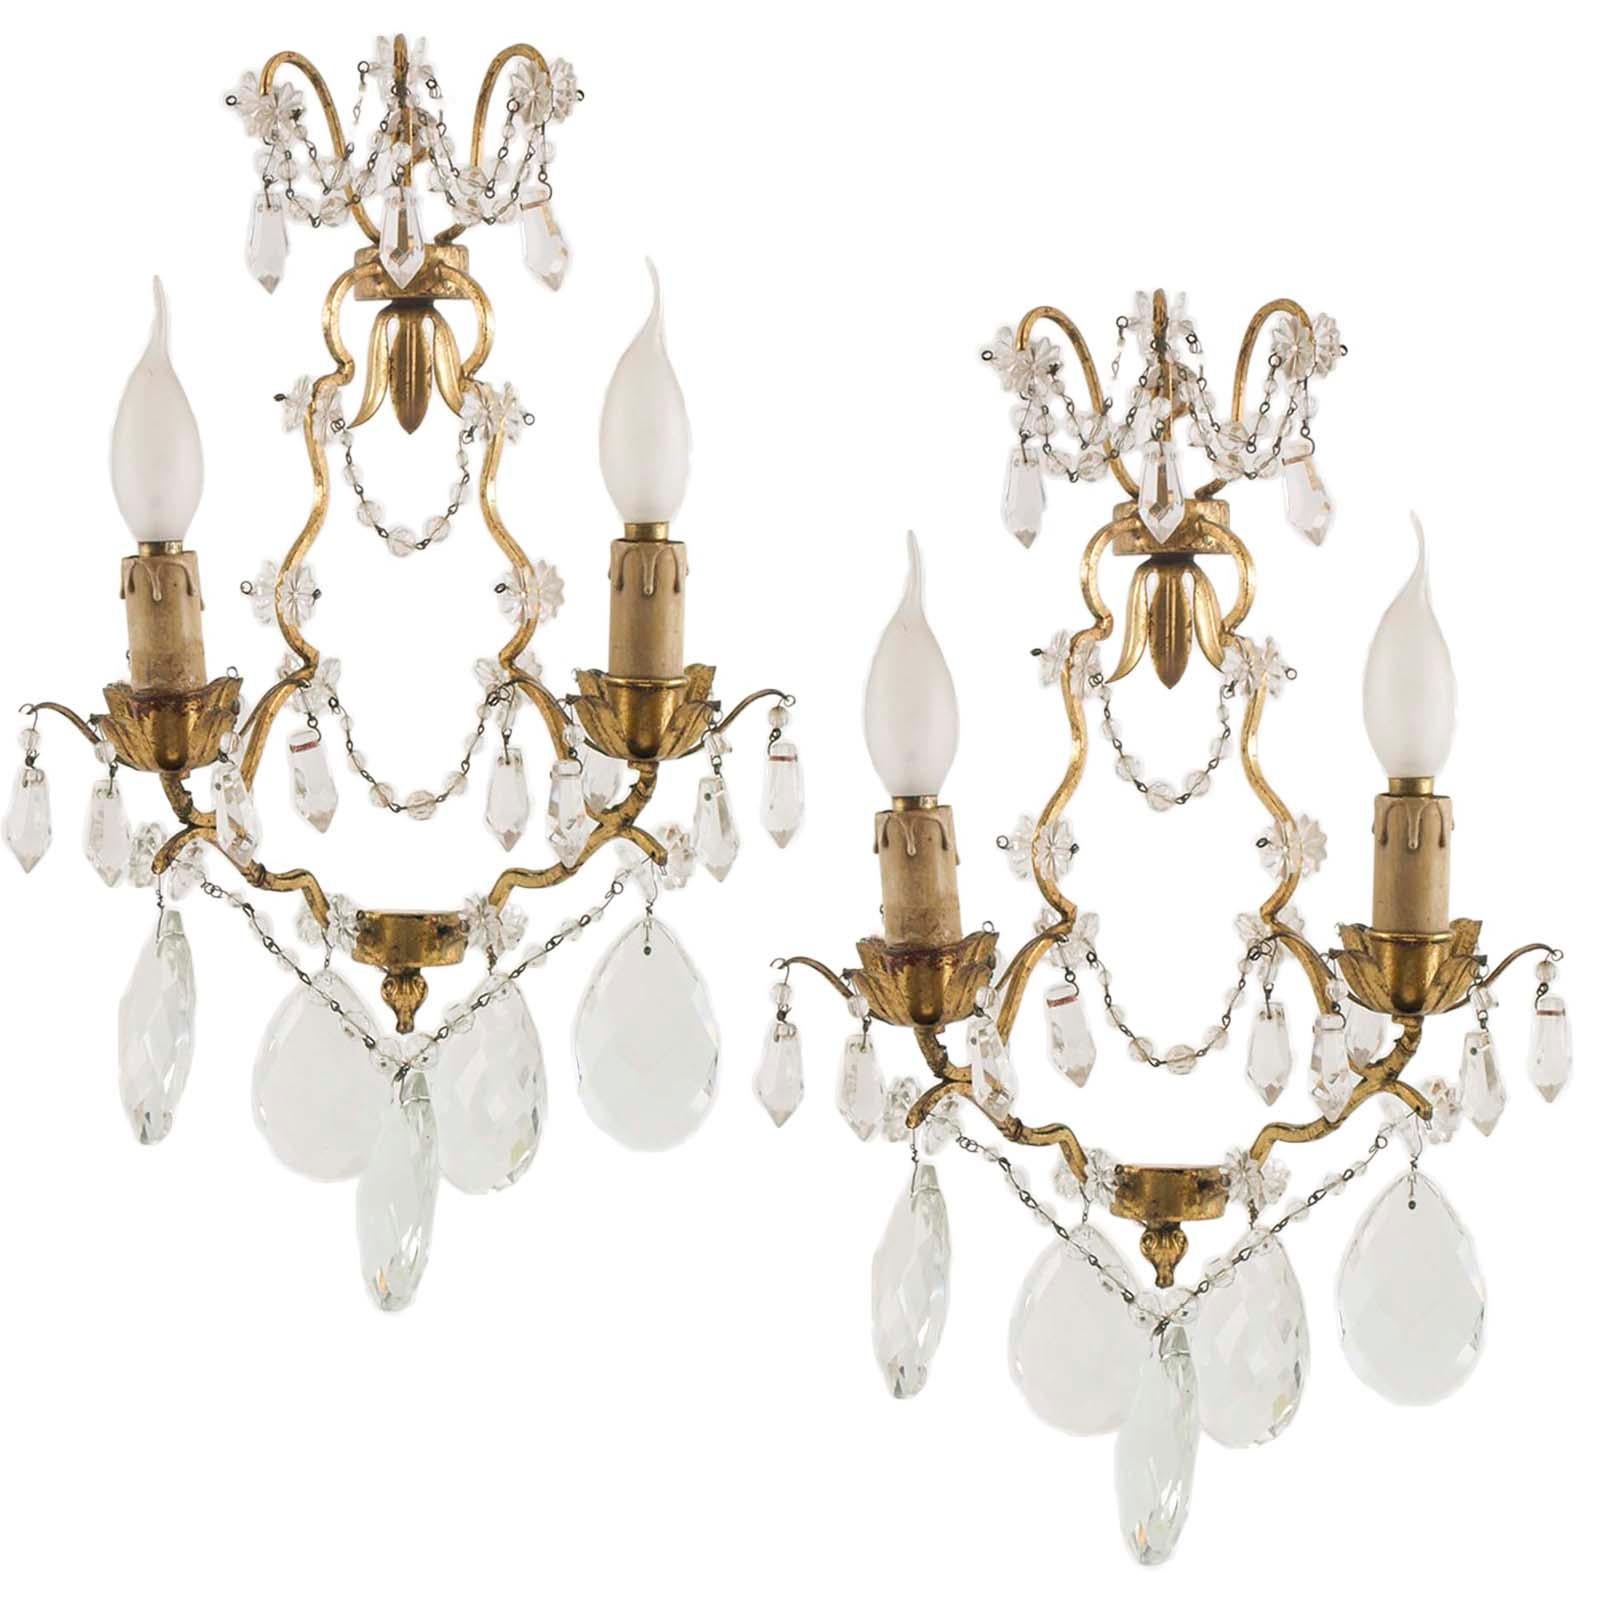 Two charming Maria Teresa sconce Swarovsky beaded that dates to the early 1900s. The sconce is detailed with an abundance of faceted drop pendants. The metal arms retain their original gold leaf. The tiny beading and faceted pendants have been